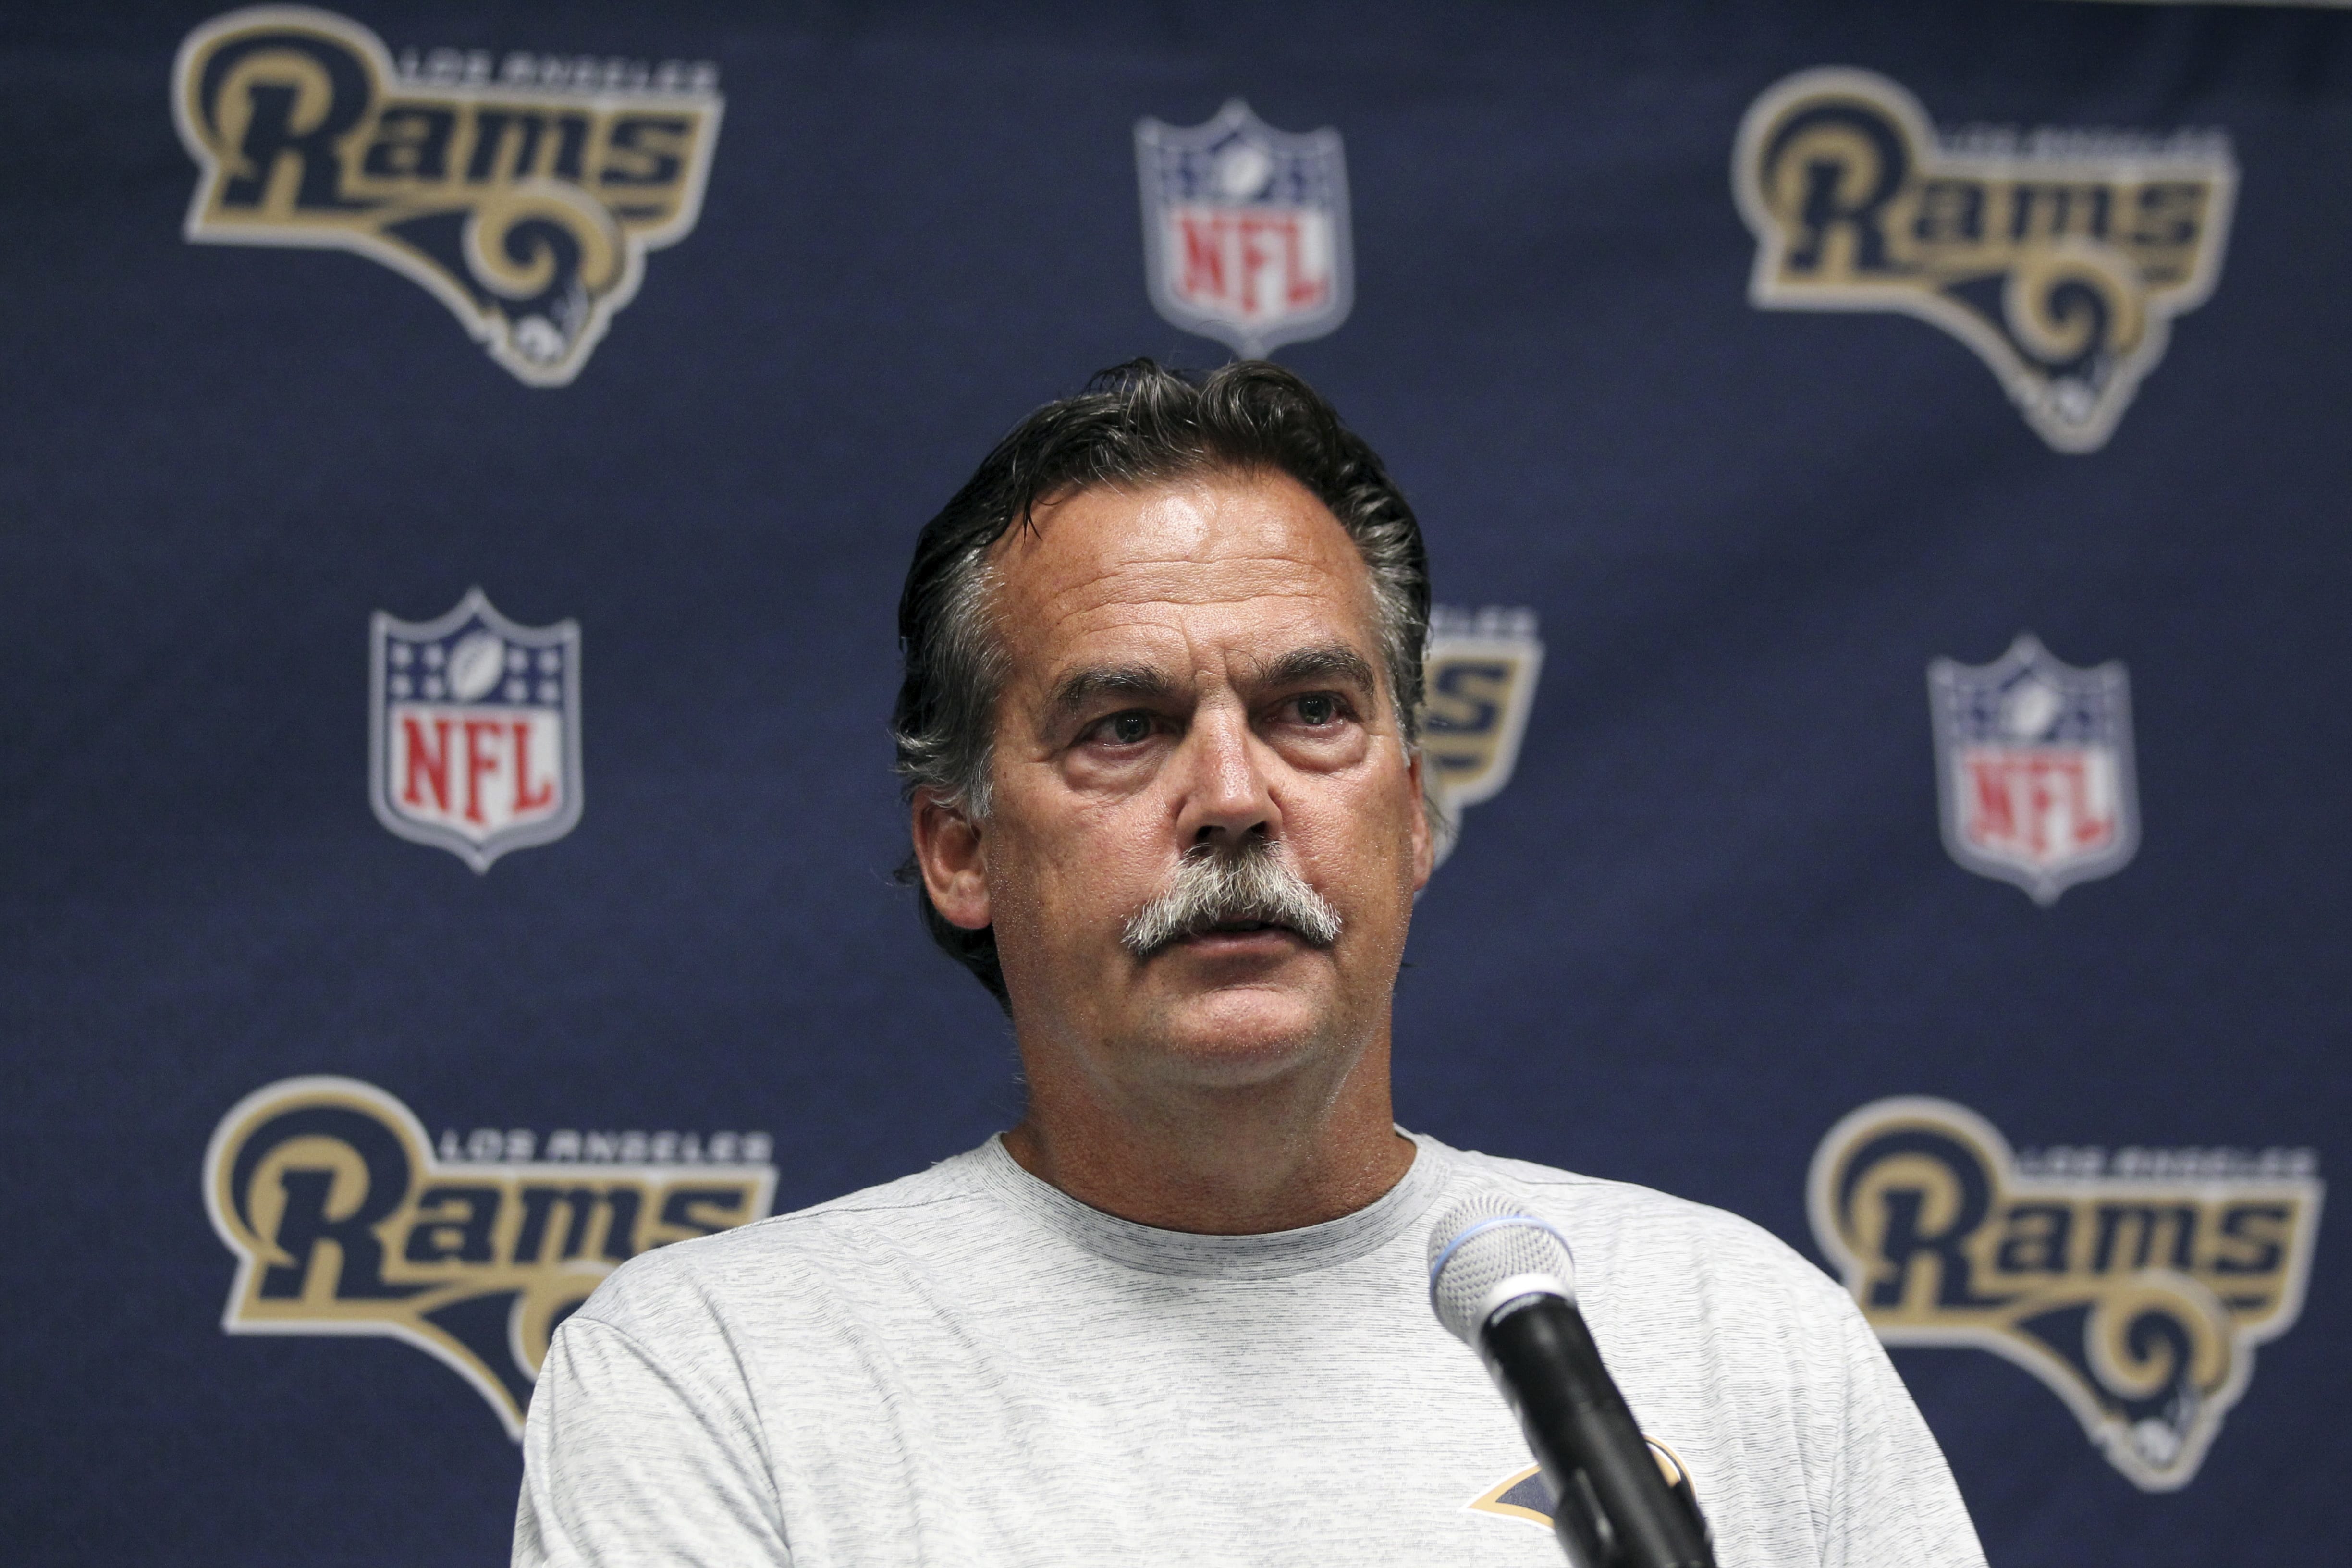 Jeff Fisher was fired Monday, Dec. 12, 2016, by the Los Angeles Rams. The team's coach since 2012, Fisher compiled a 31-45-1 record with the Rams and oversaw the move from St. Louis to Los Angeles this past offseason.